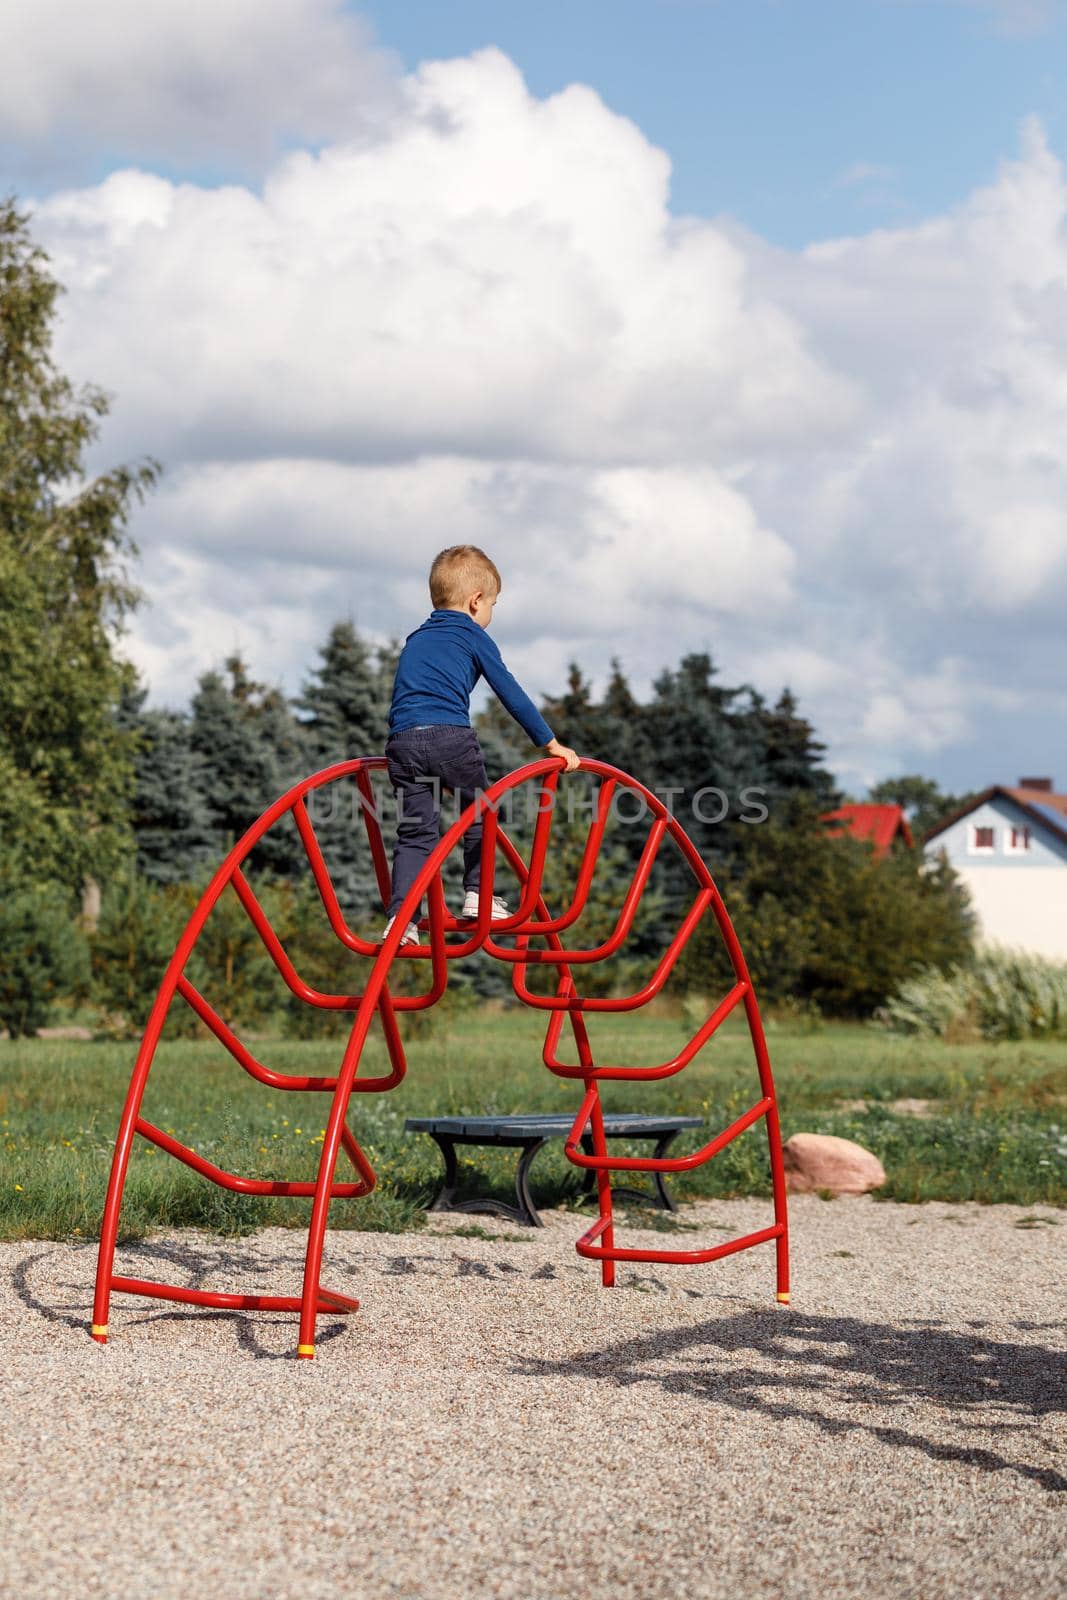 A little very brave boy climbs a metal, big red arched ladder on the playground. The concept of parental care and safety in children's play by Lincikas